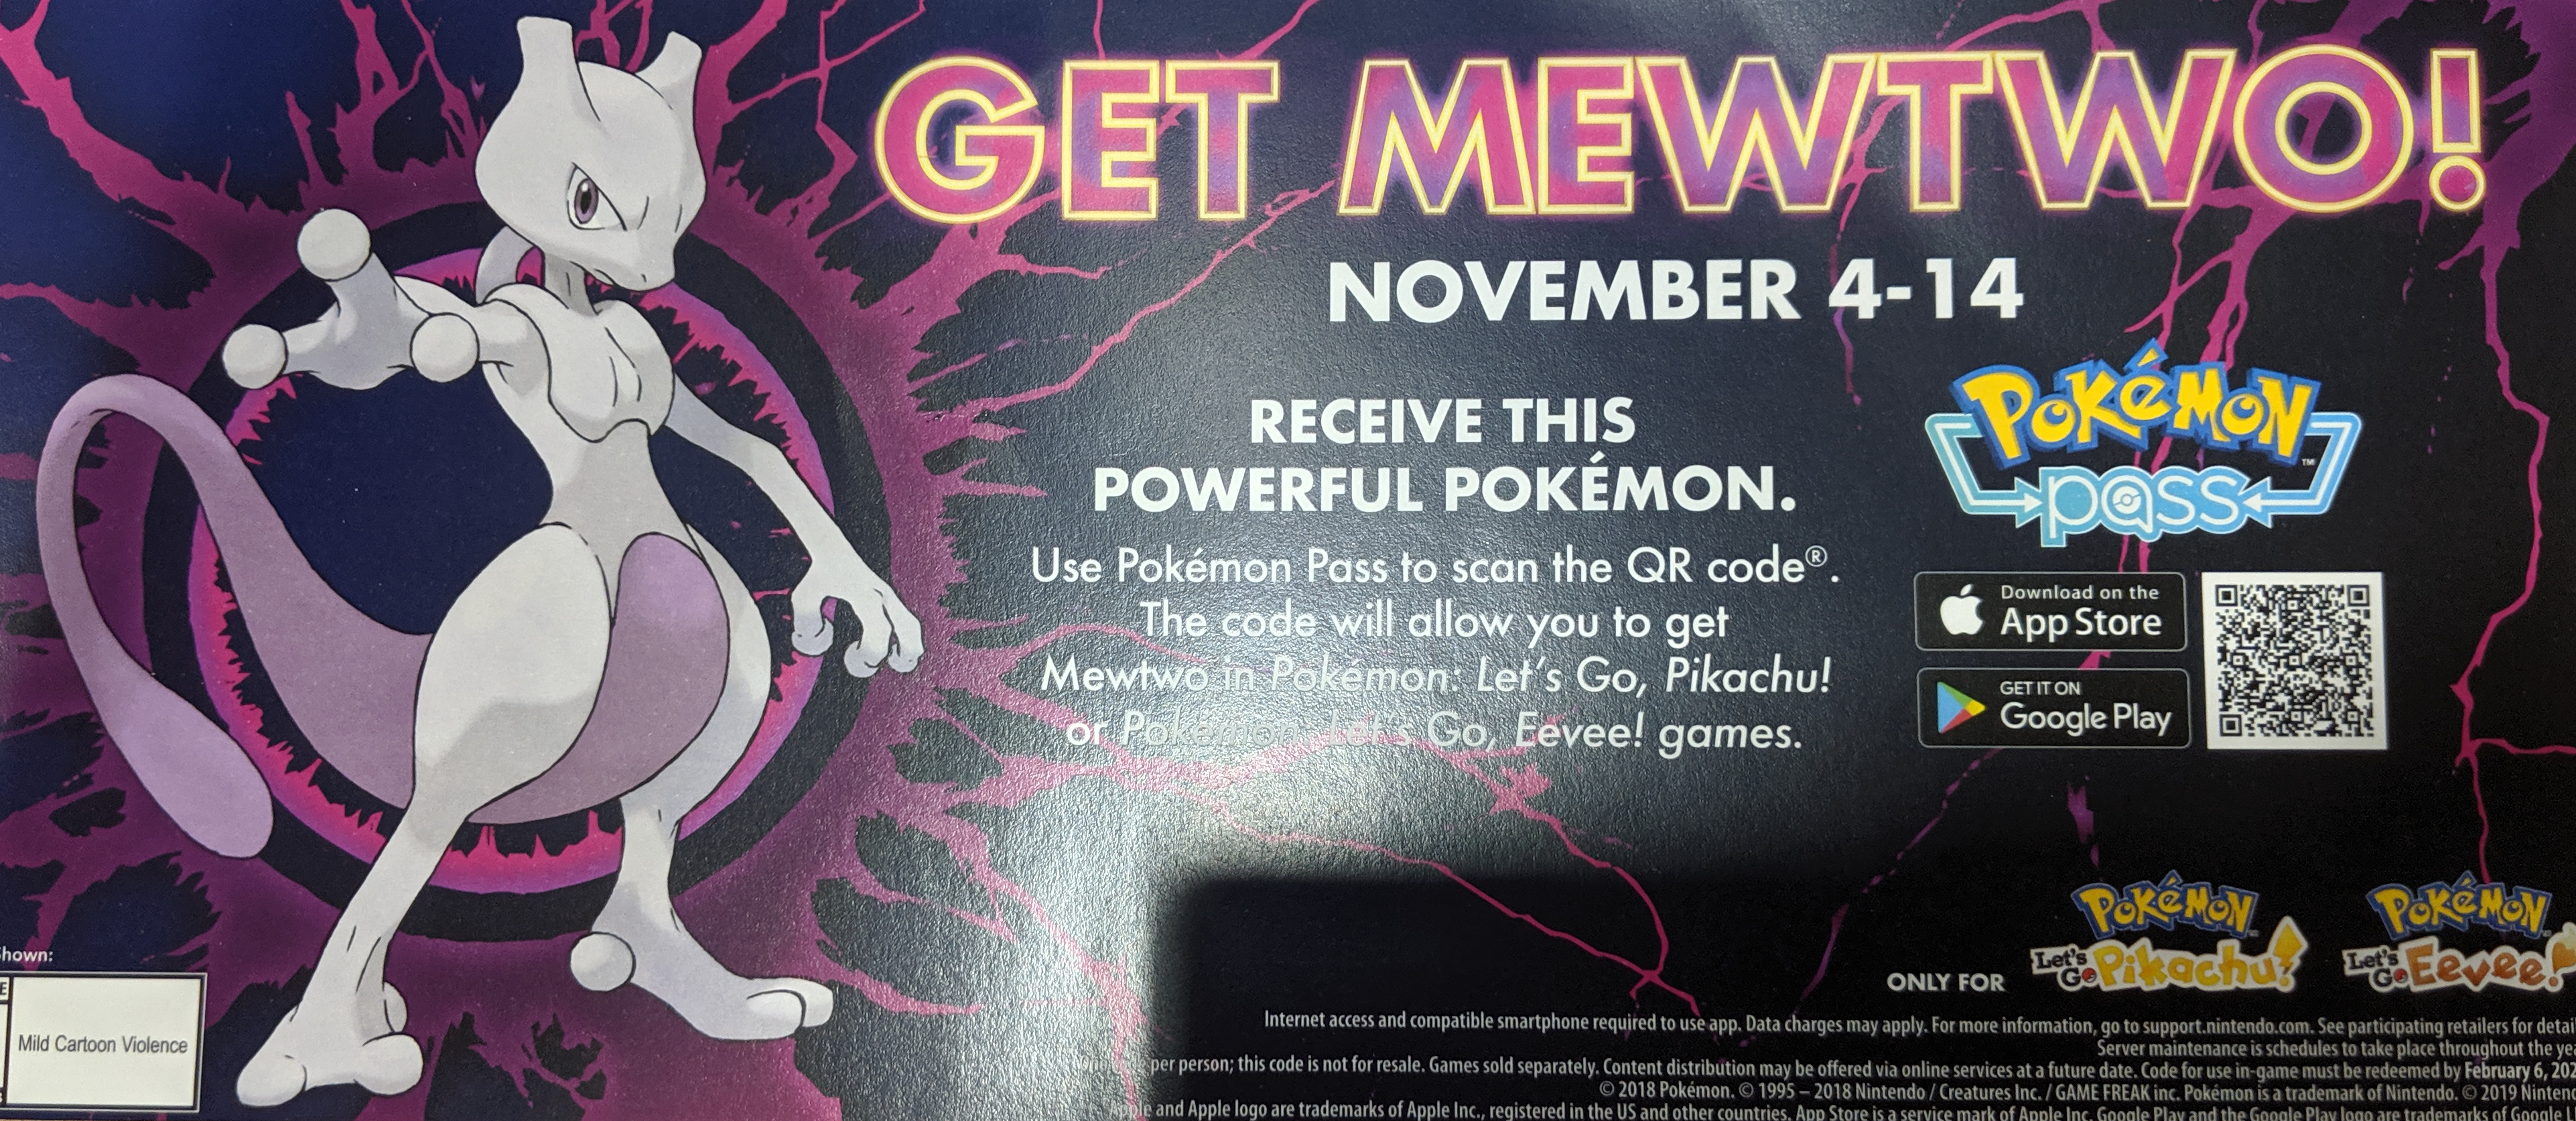 Best Buy Offering Mewtwo Distribution For Pokemon Lets Go